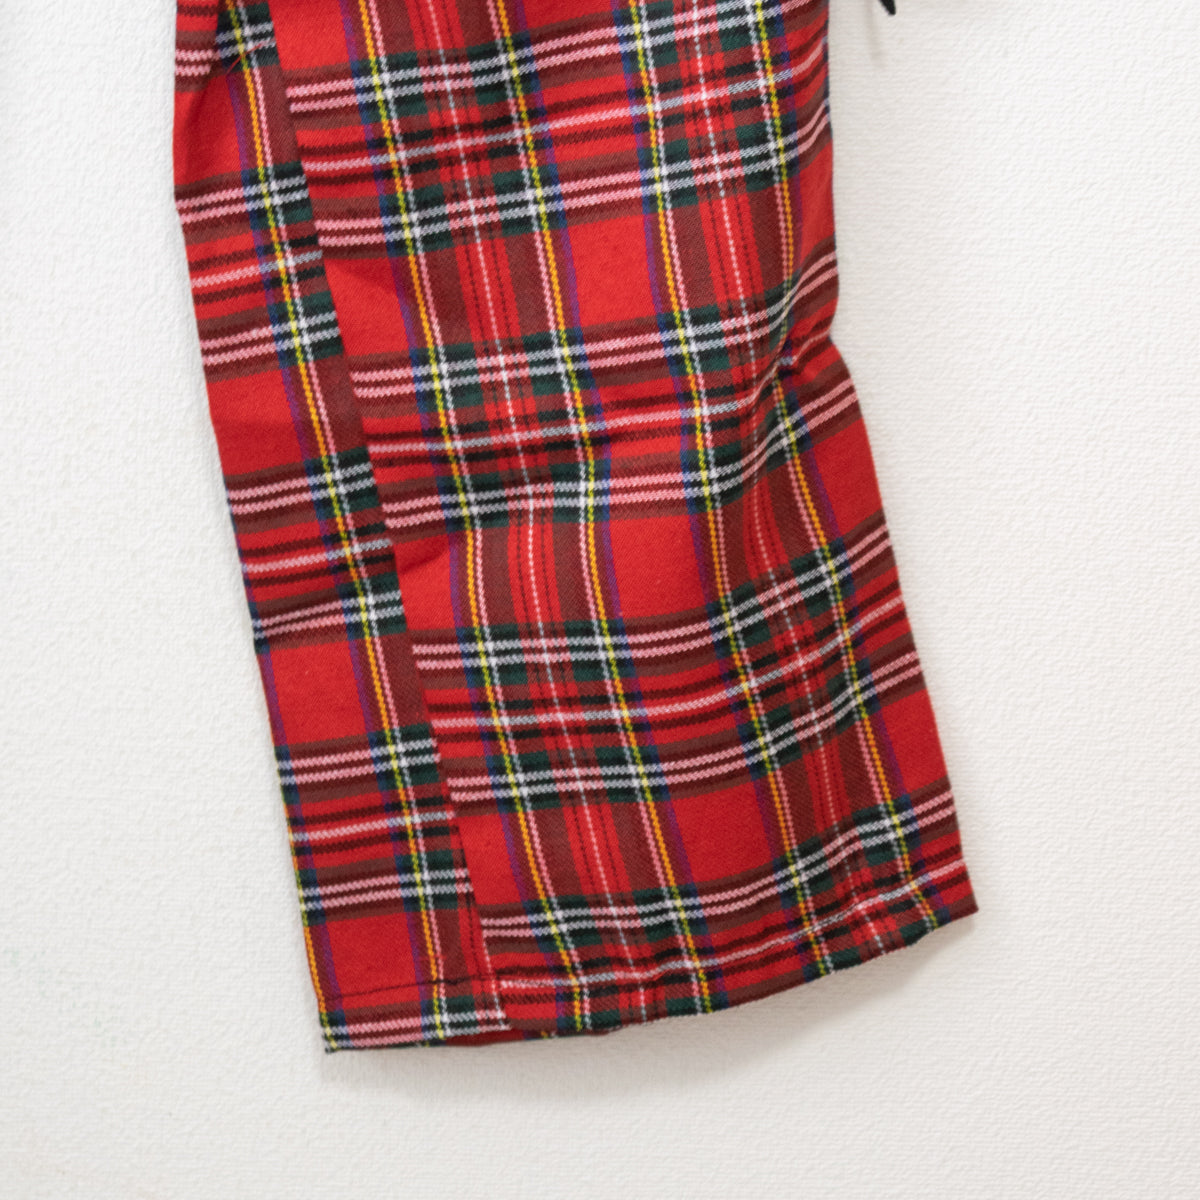 ACDC Rag Wing Heart Belt Long Pants Red Tartan Check - YOUAREMYPOISON